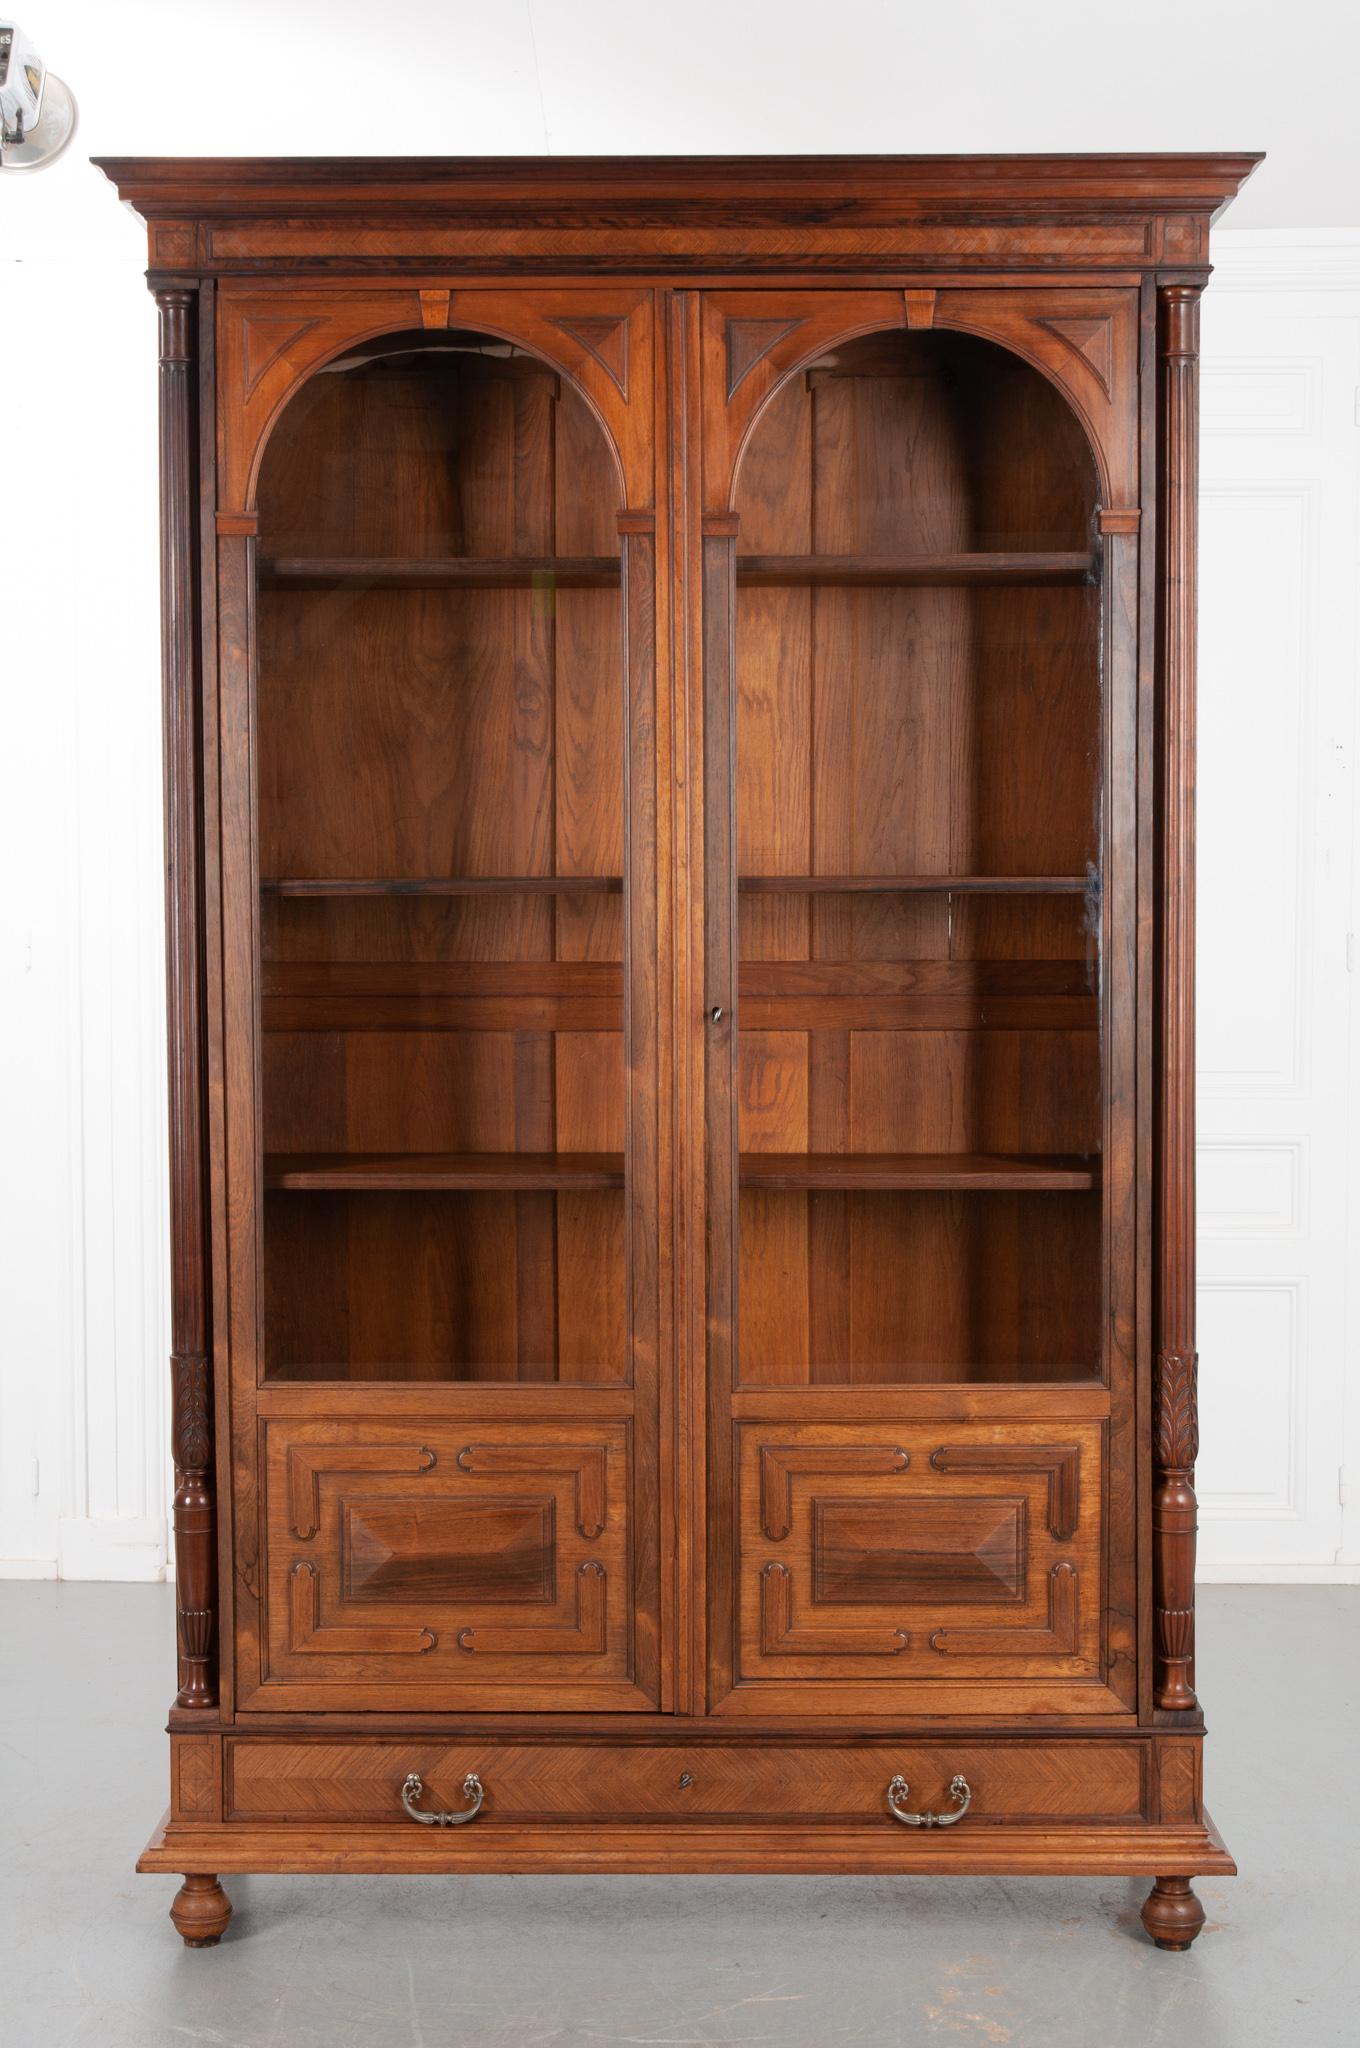 A handsome solid rosewood bibliotheque, crafted in France circa 1890. Gorgeous arched doors with beveled glass and geometric carvings accentuate the display space at the top of this bookcase. Four adjustable shelves provide plenty of space for your